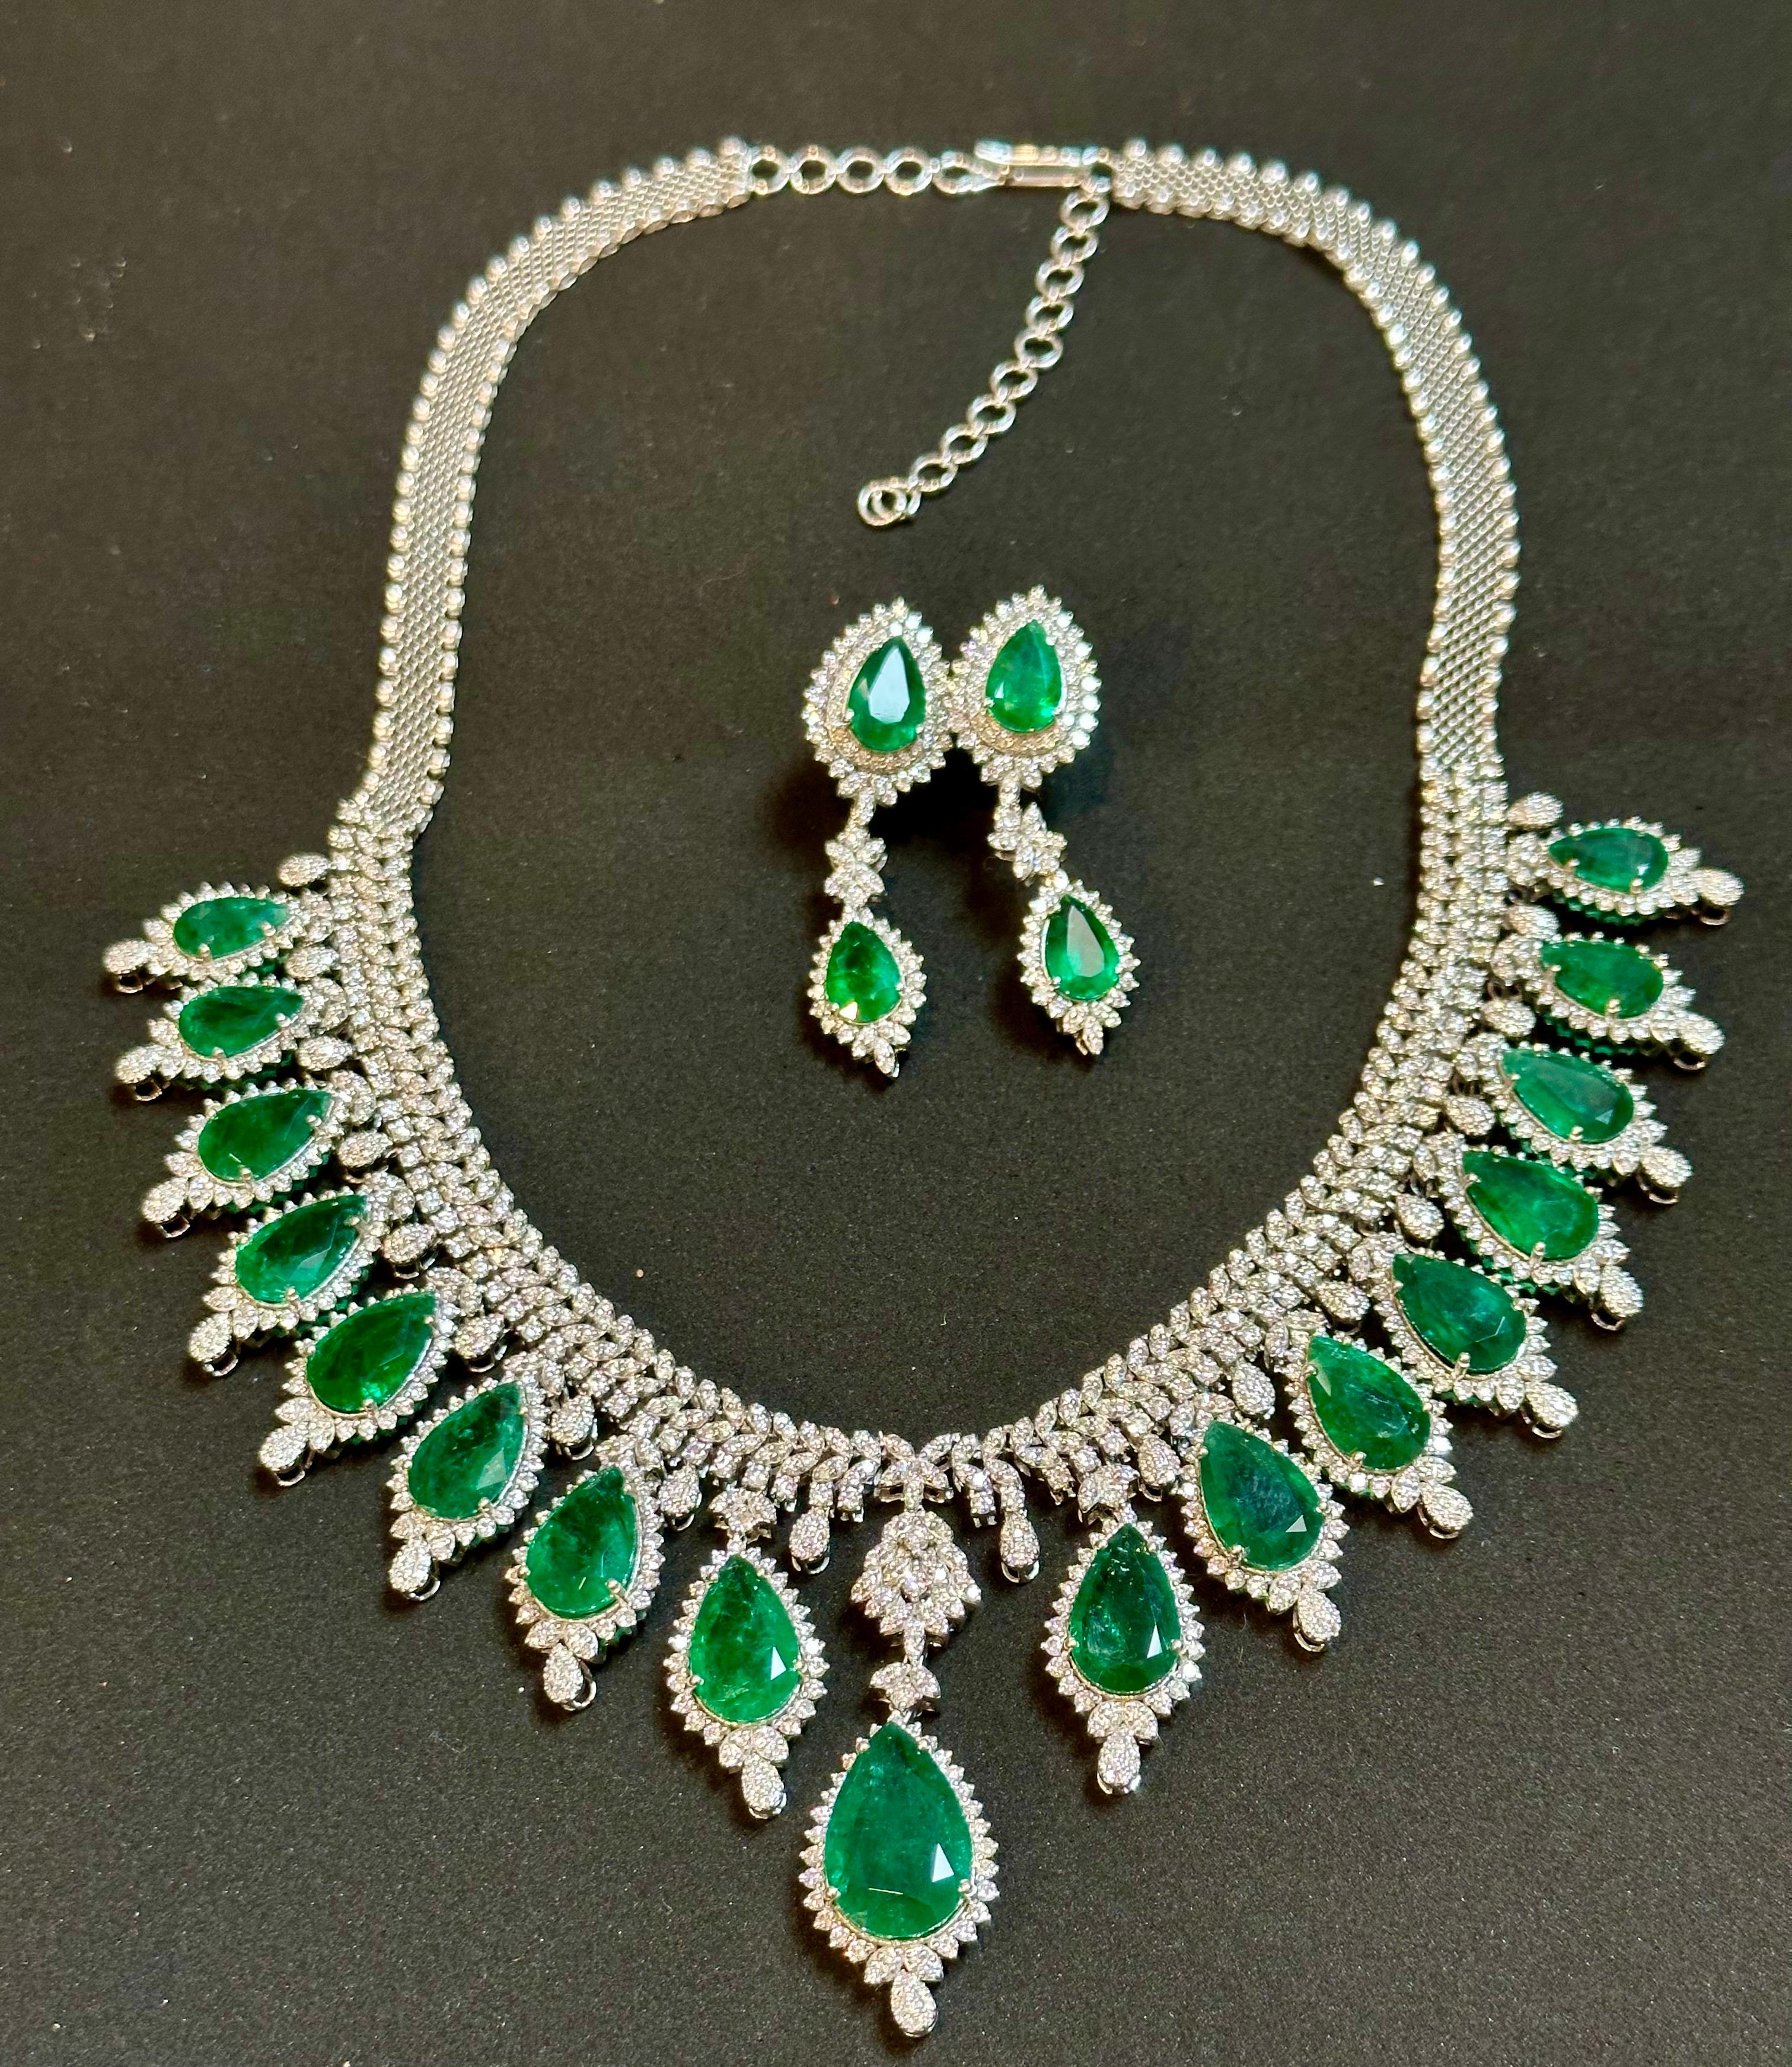 Pear Cut 73ct Zambian Emerald and 22ct Diamond Necklace and Earring Bridal Suite For Sale